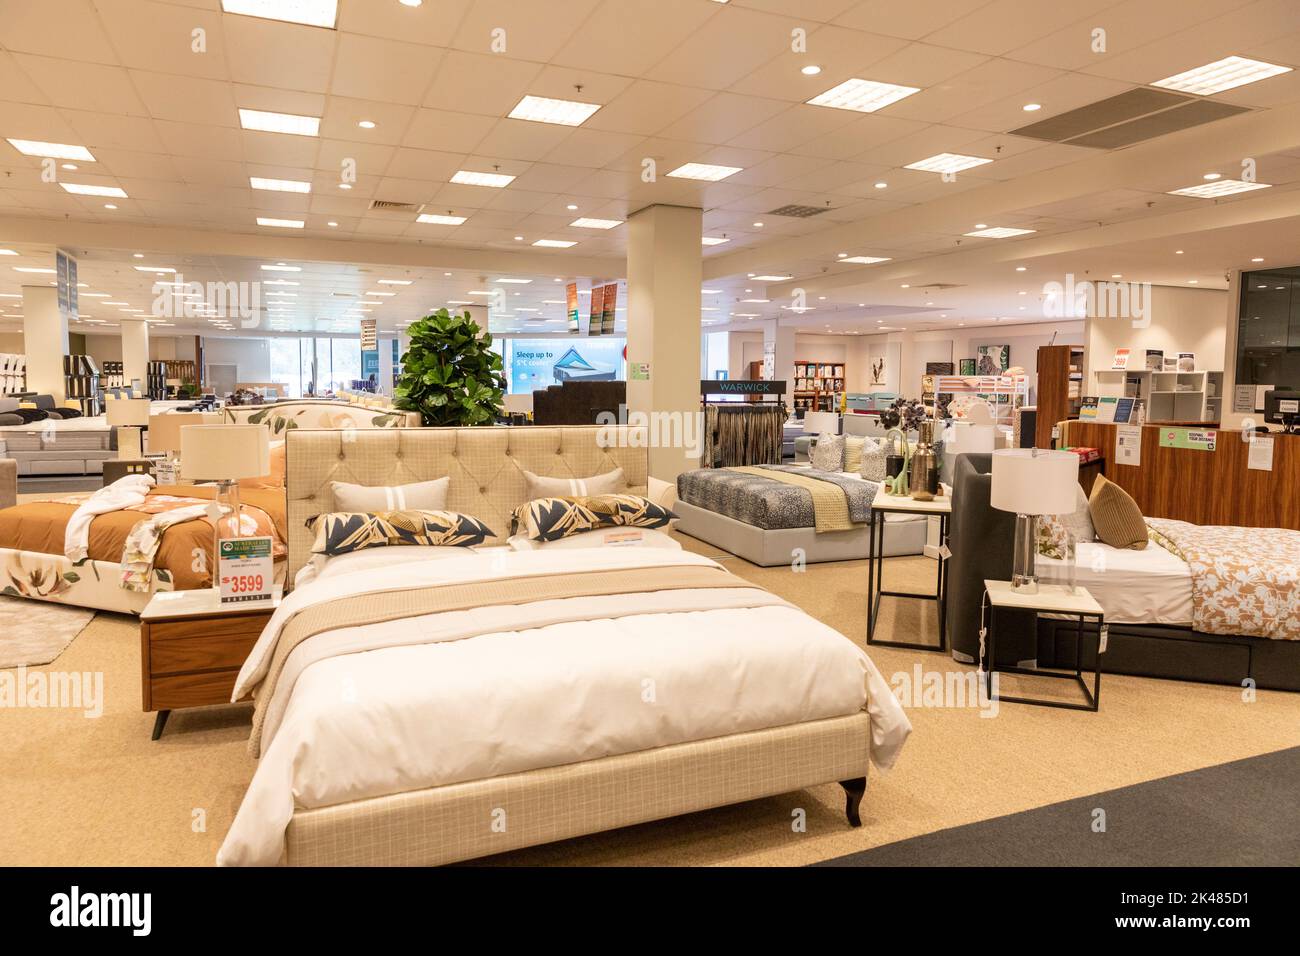 Beds for sale in Australian retail store branch of Domayne Harvey Norman in Belrose shopping mall,Sydney,NSW,Australia Stock Photo